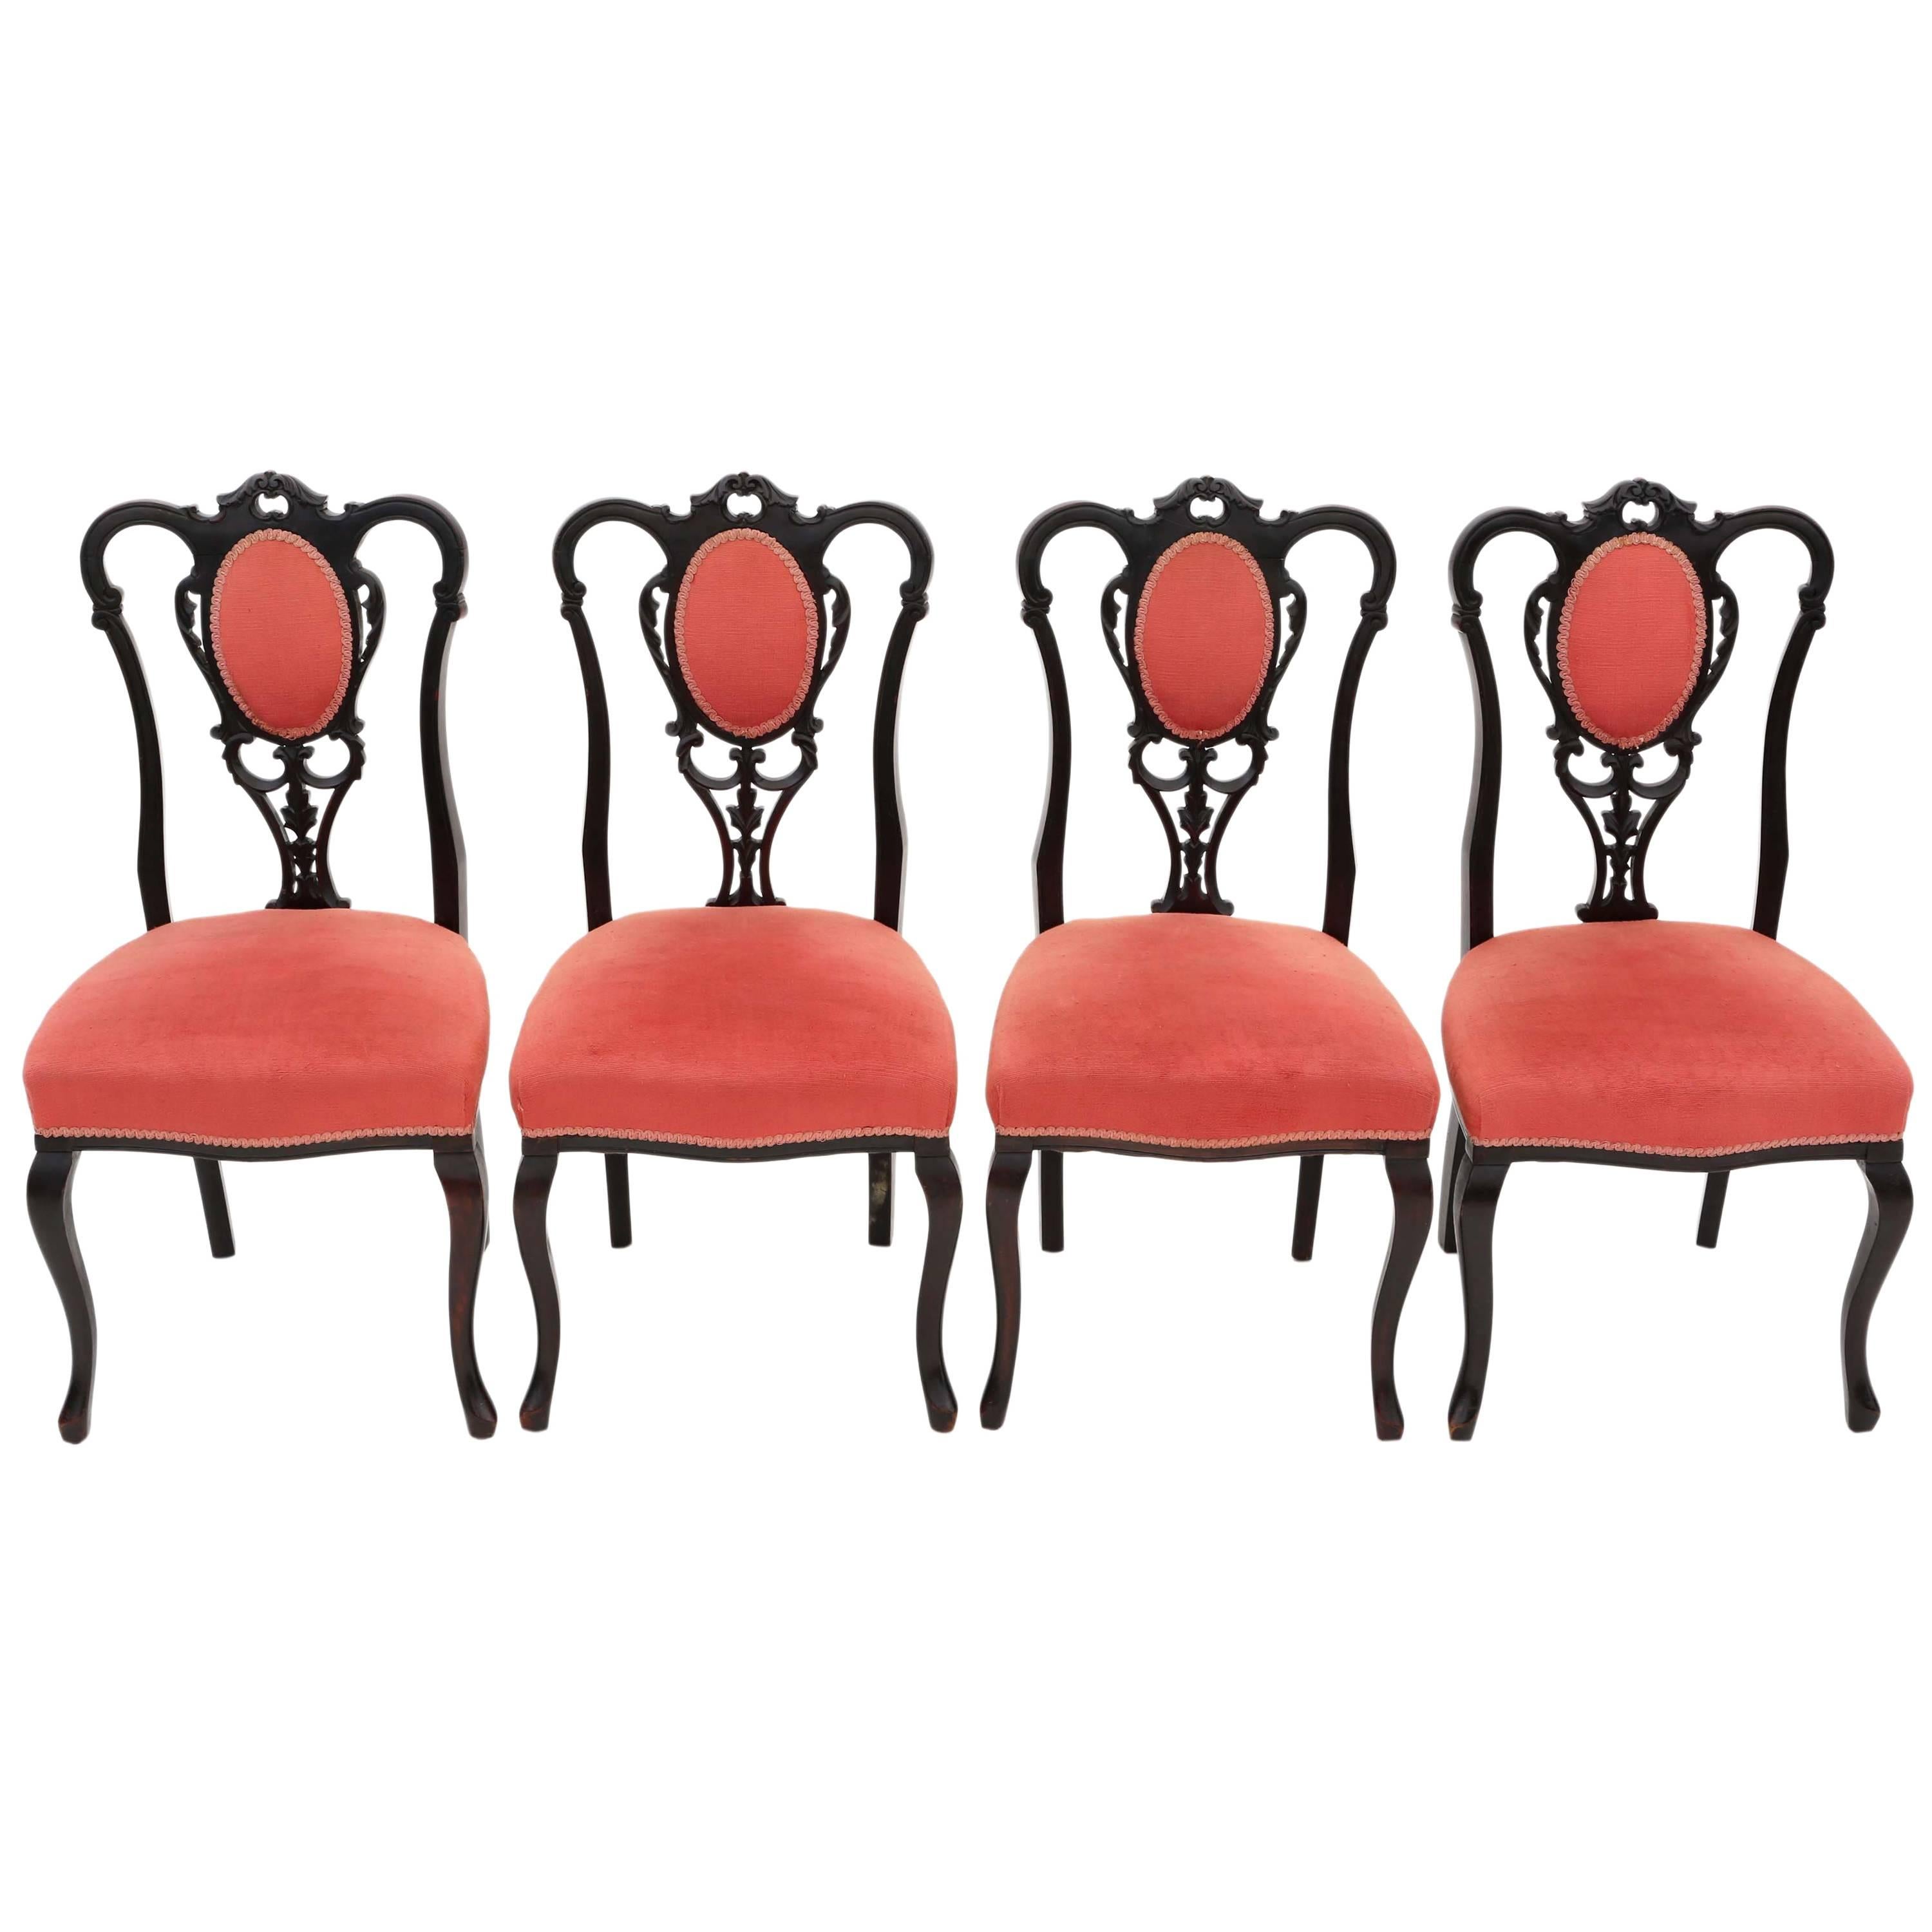 Antique Set of Four Victorian Ebonized Mahogany Dining Chairs